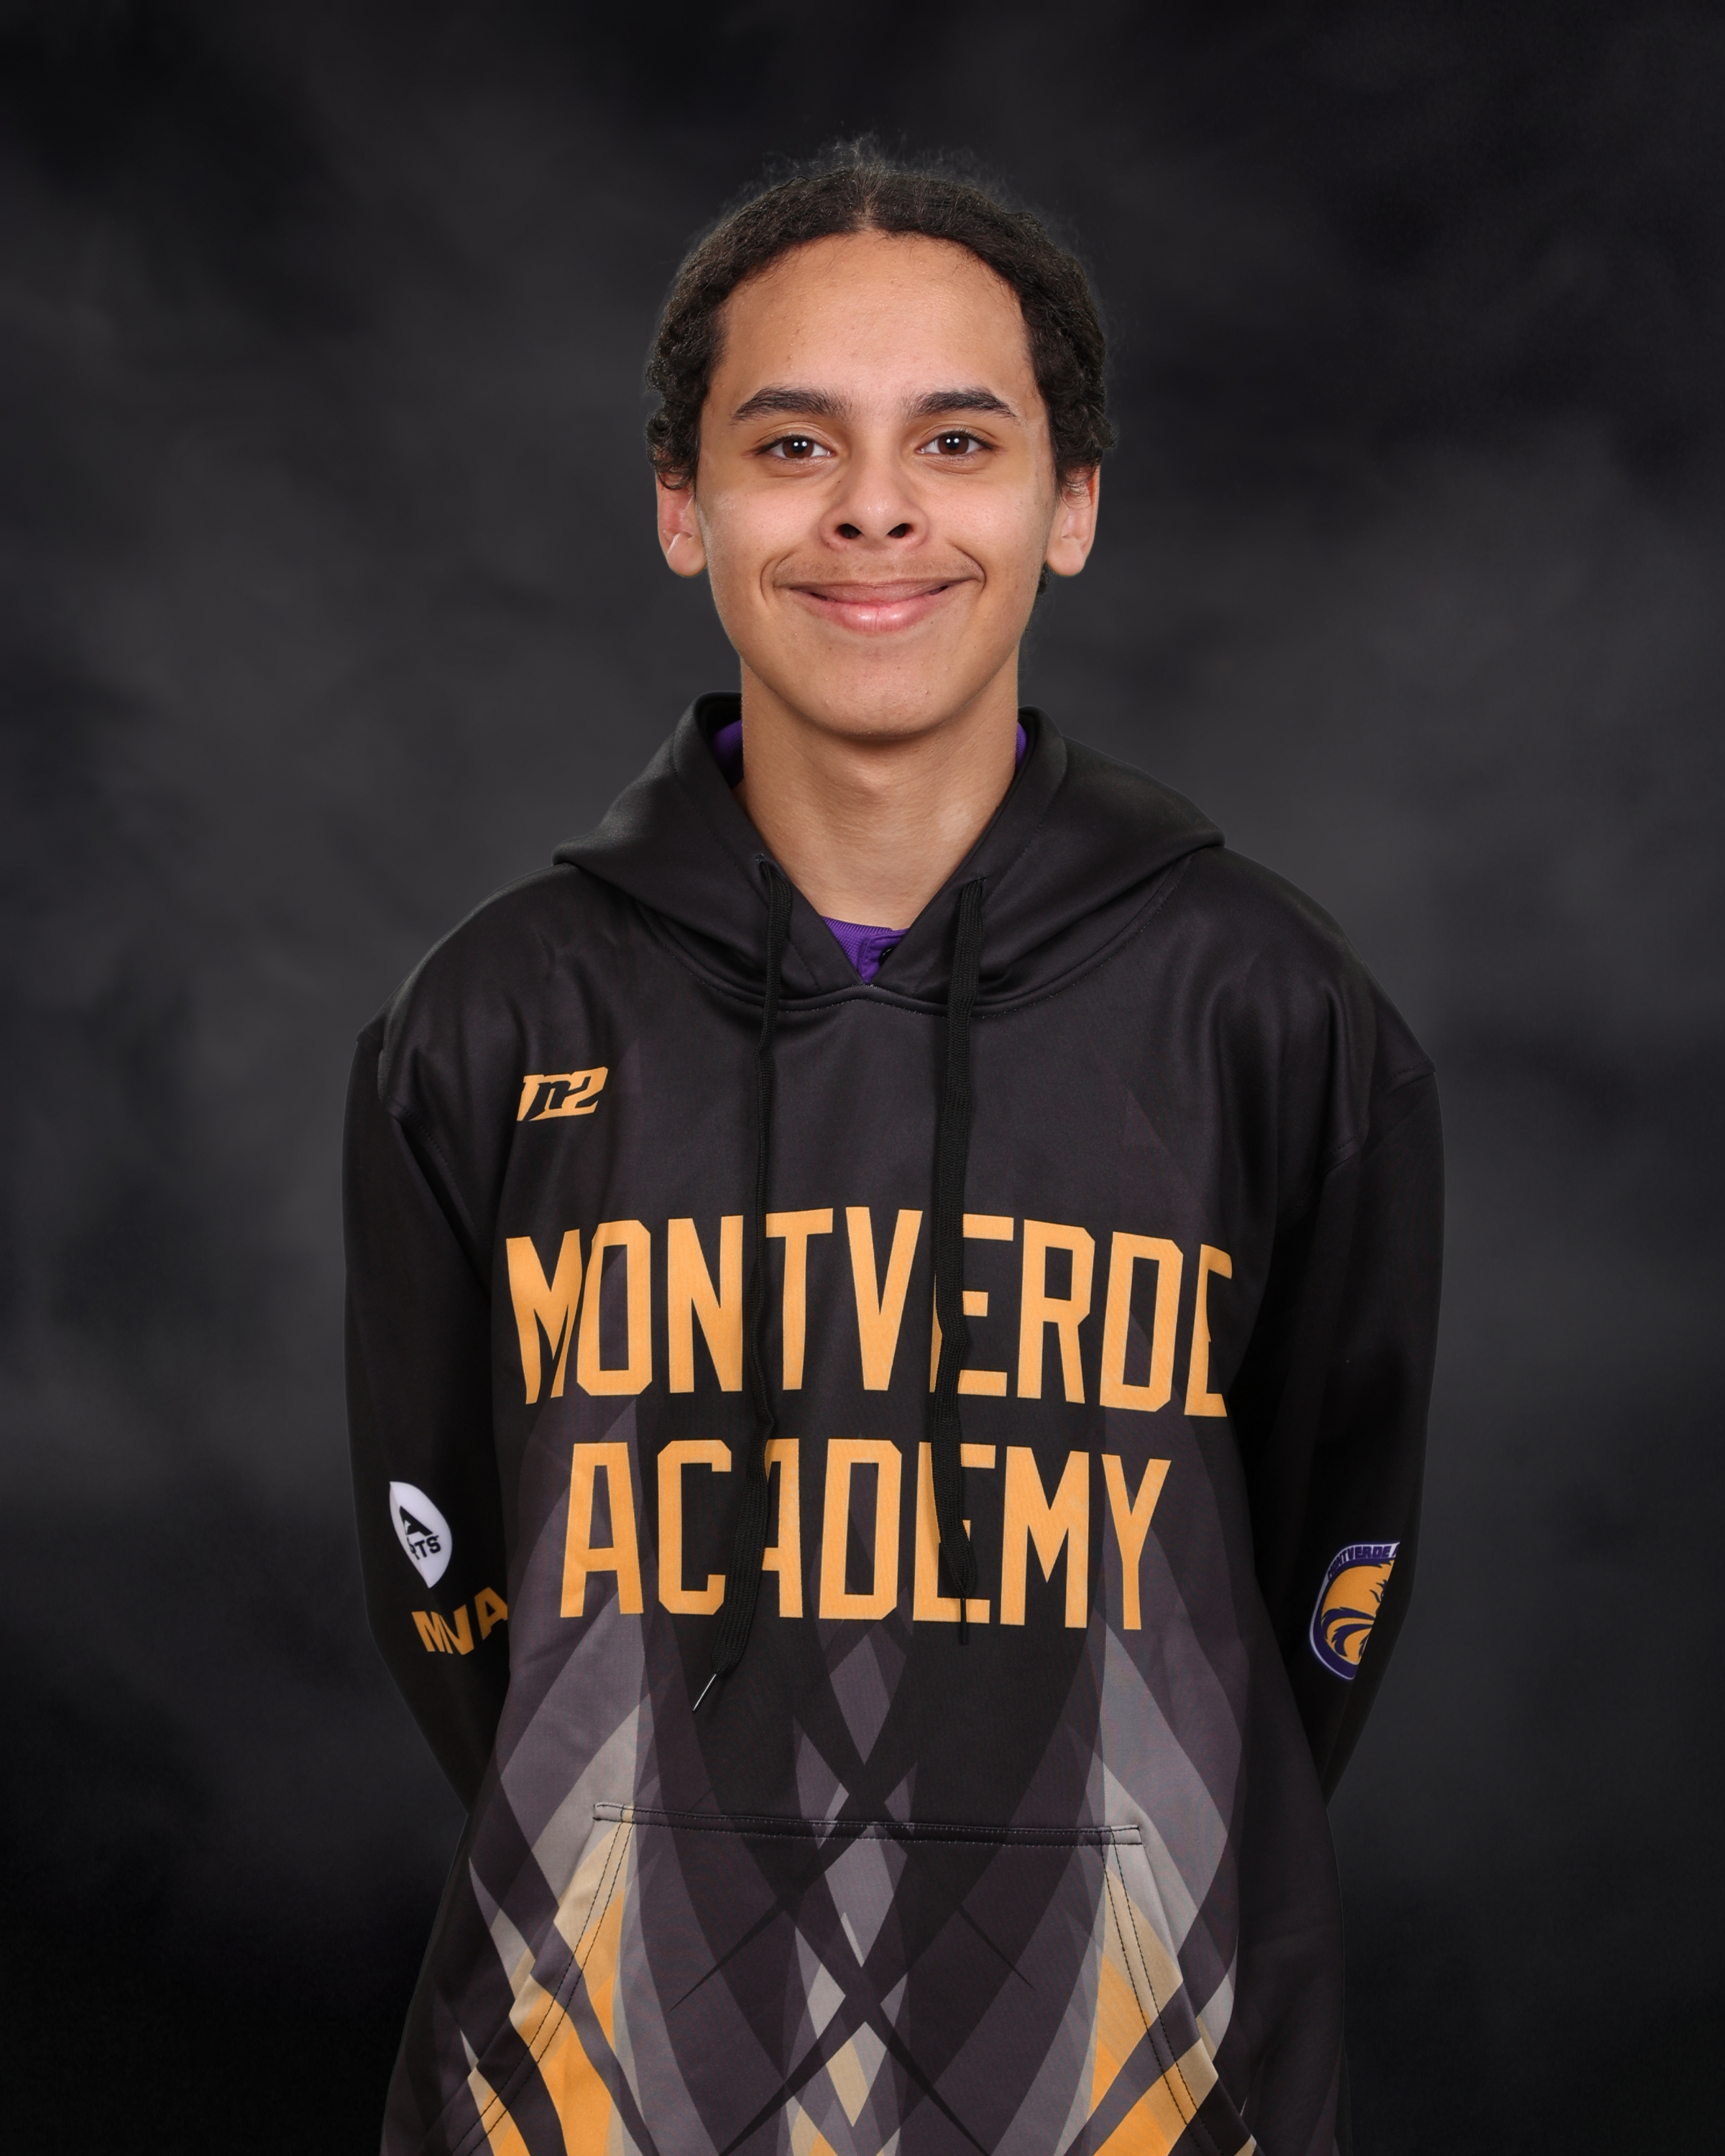 A young male student with black hair smiles at the camera for a photo against a black background. The student is wearing a sweatshirt that reads “MONTVERDE ACADEMY.”